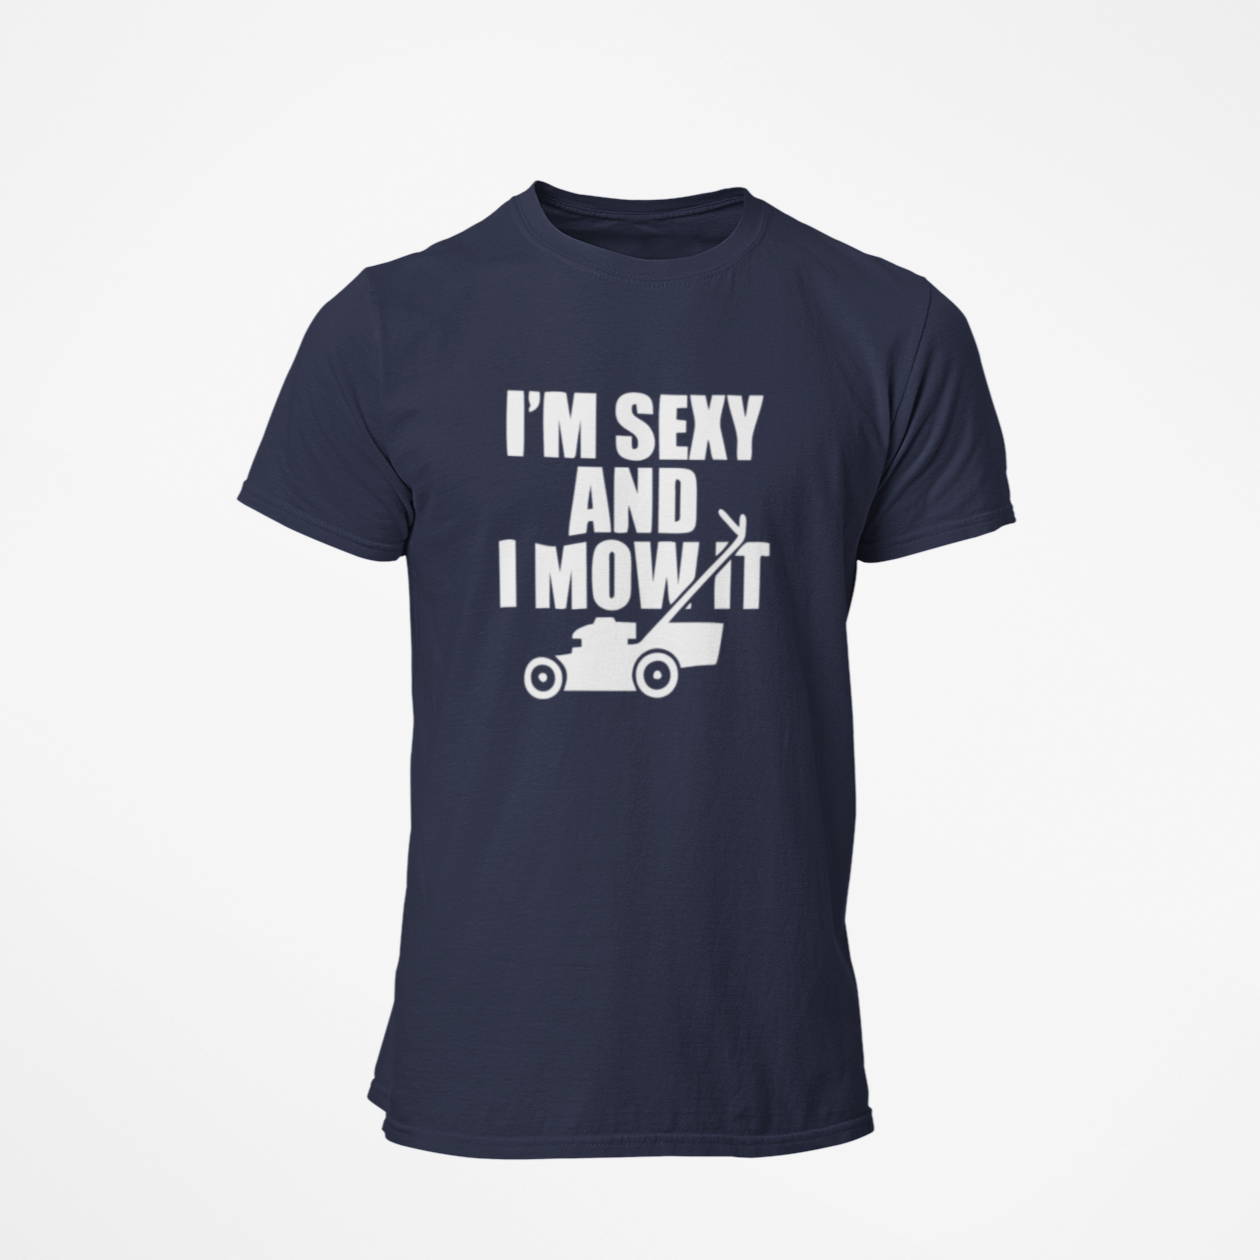 Im sexy and I mow it - navy